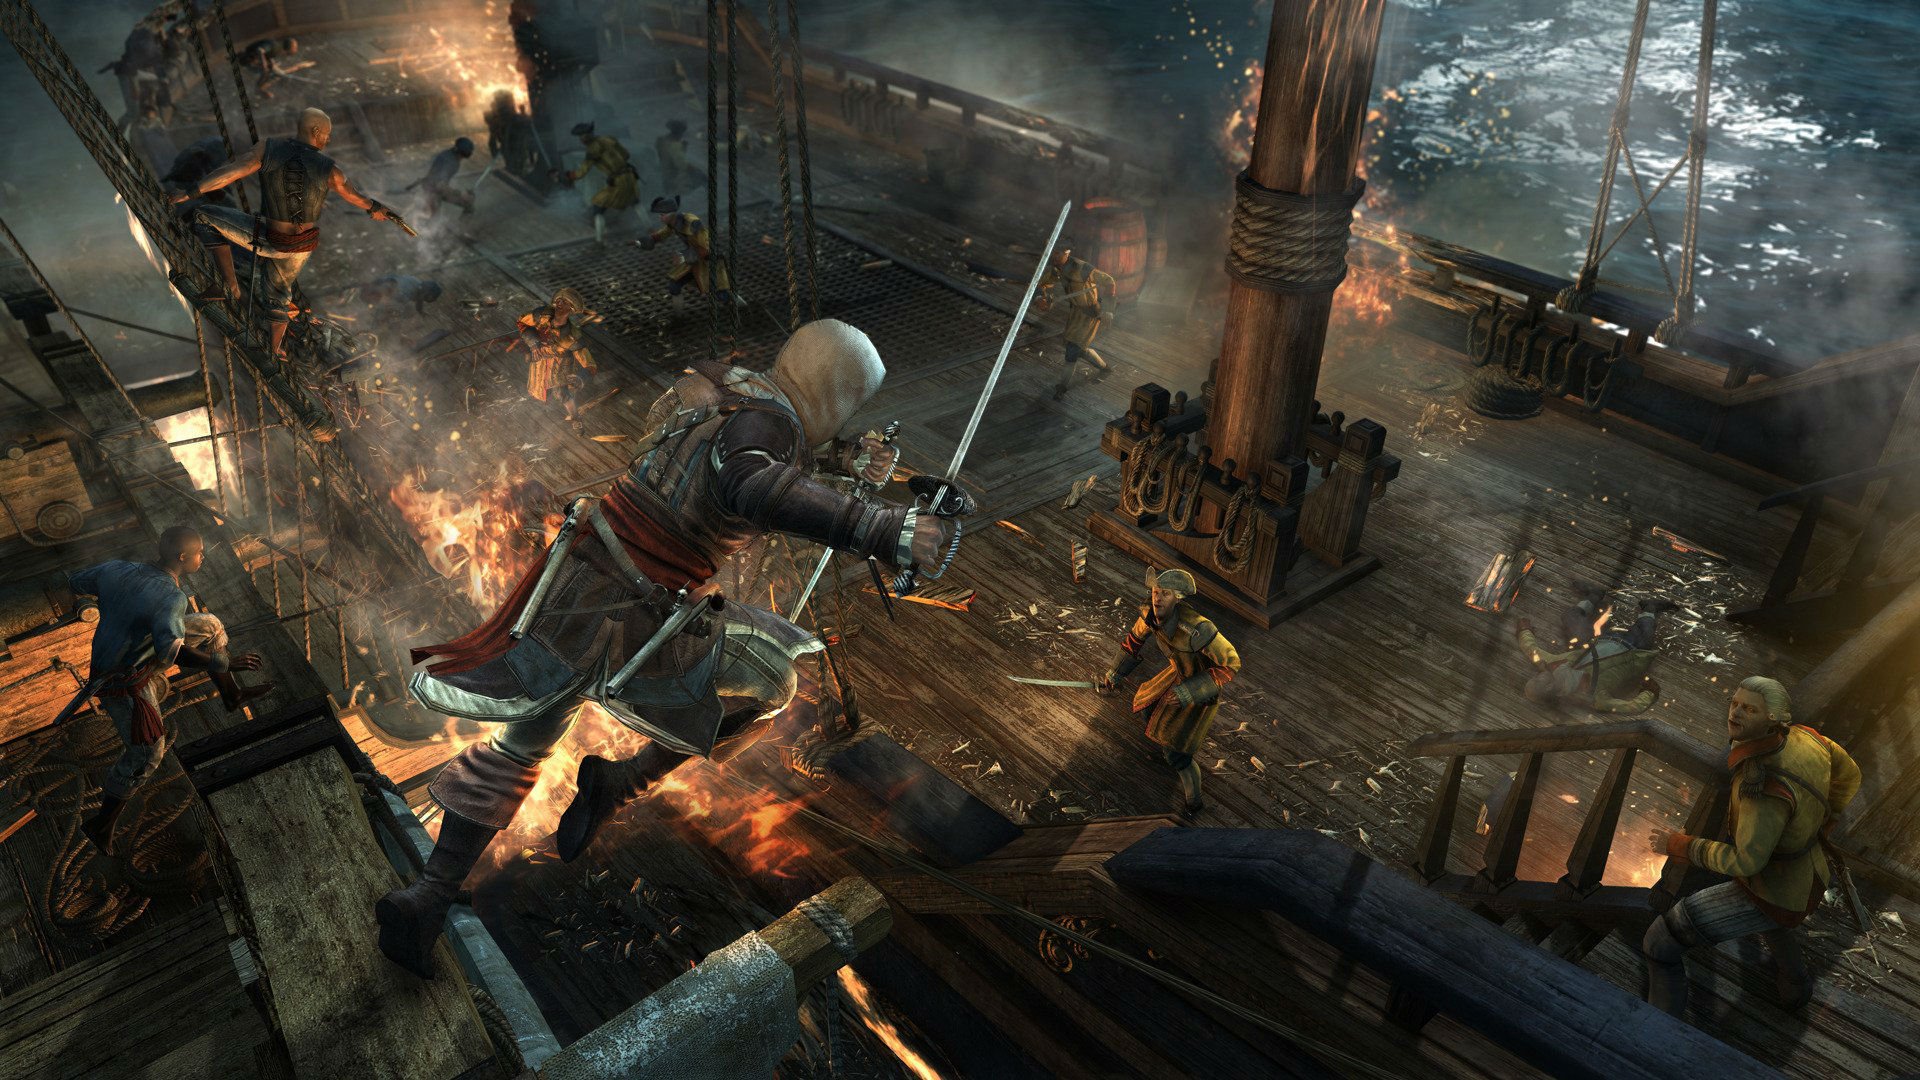 assassins, Creed, Black, Flag, Fantasy, Fighting, Action, Stealth, Adventure, Pirate Wallpaper